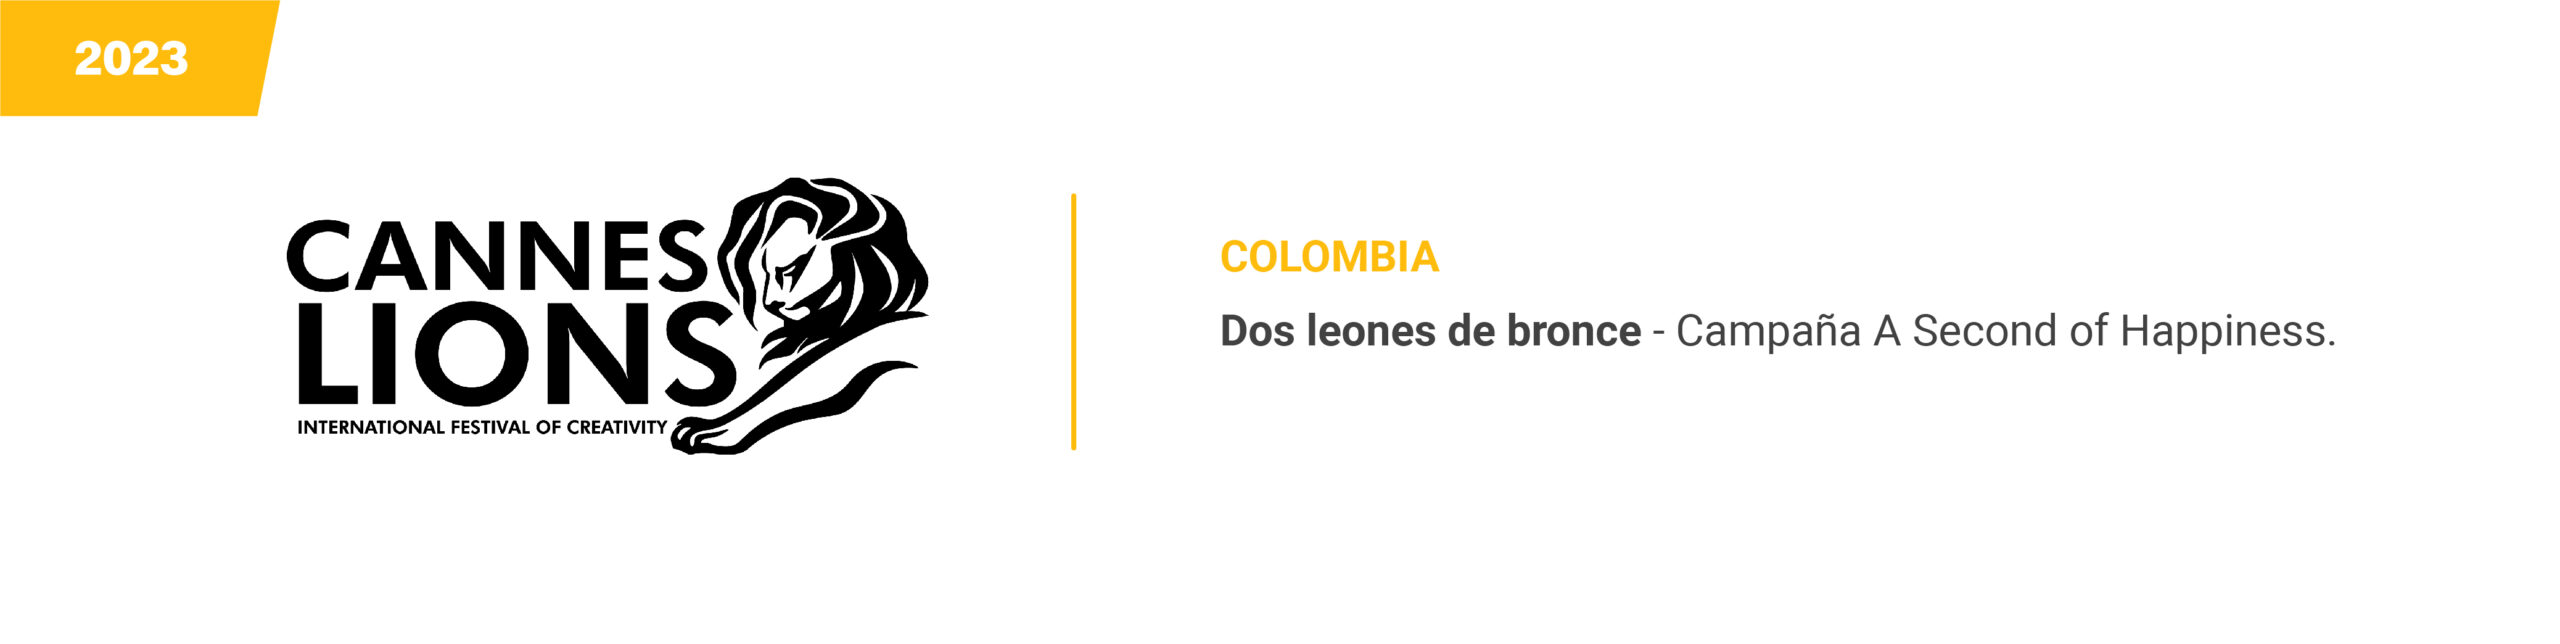 CANNES LIONS - Colombia